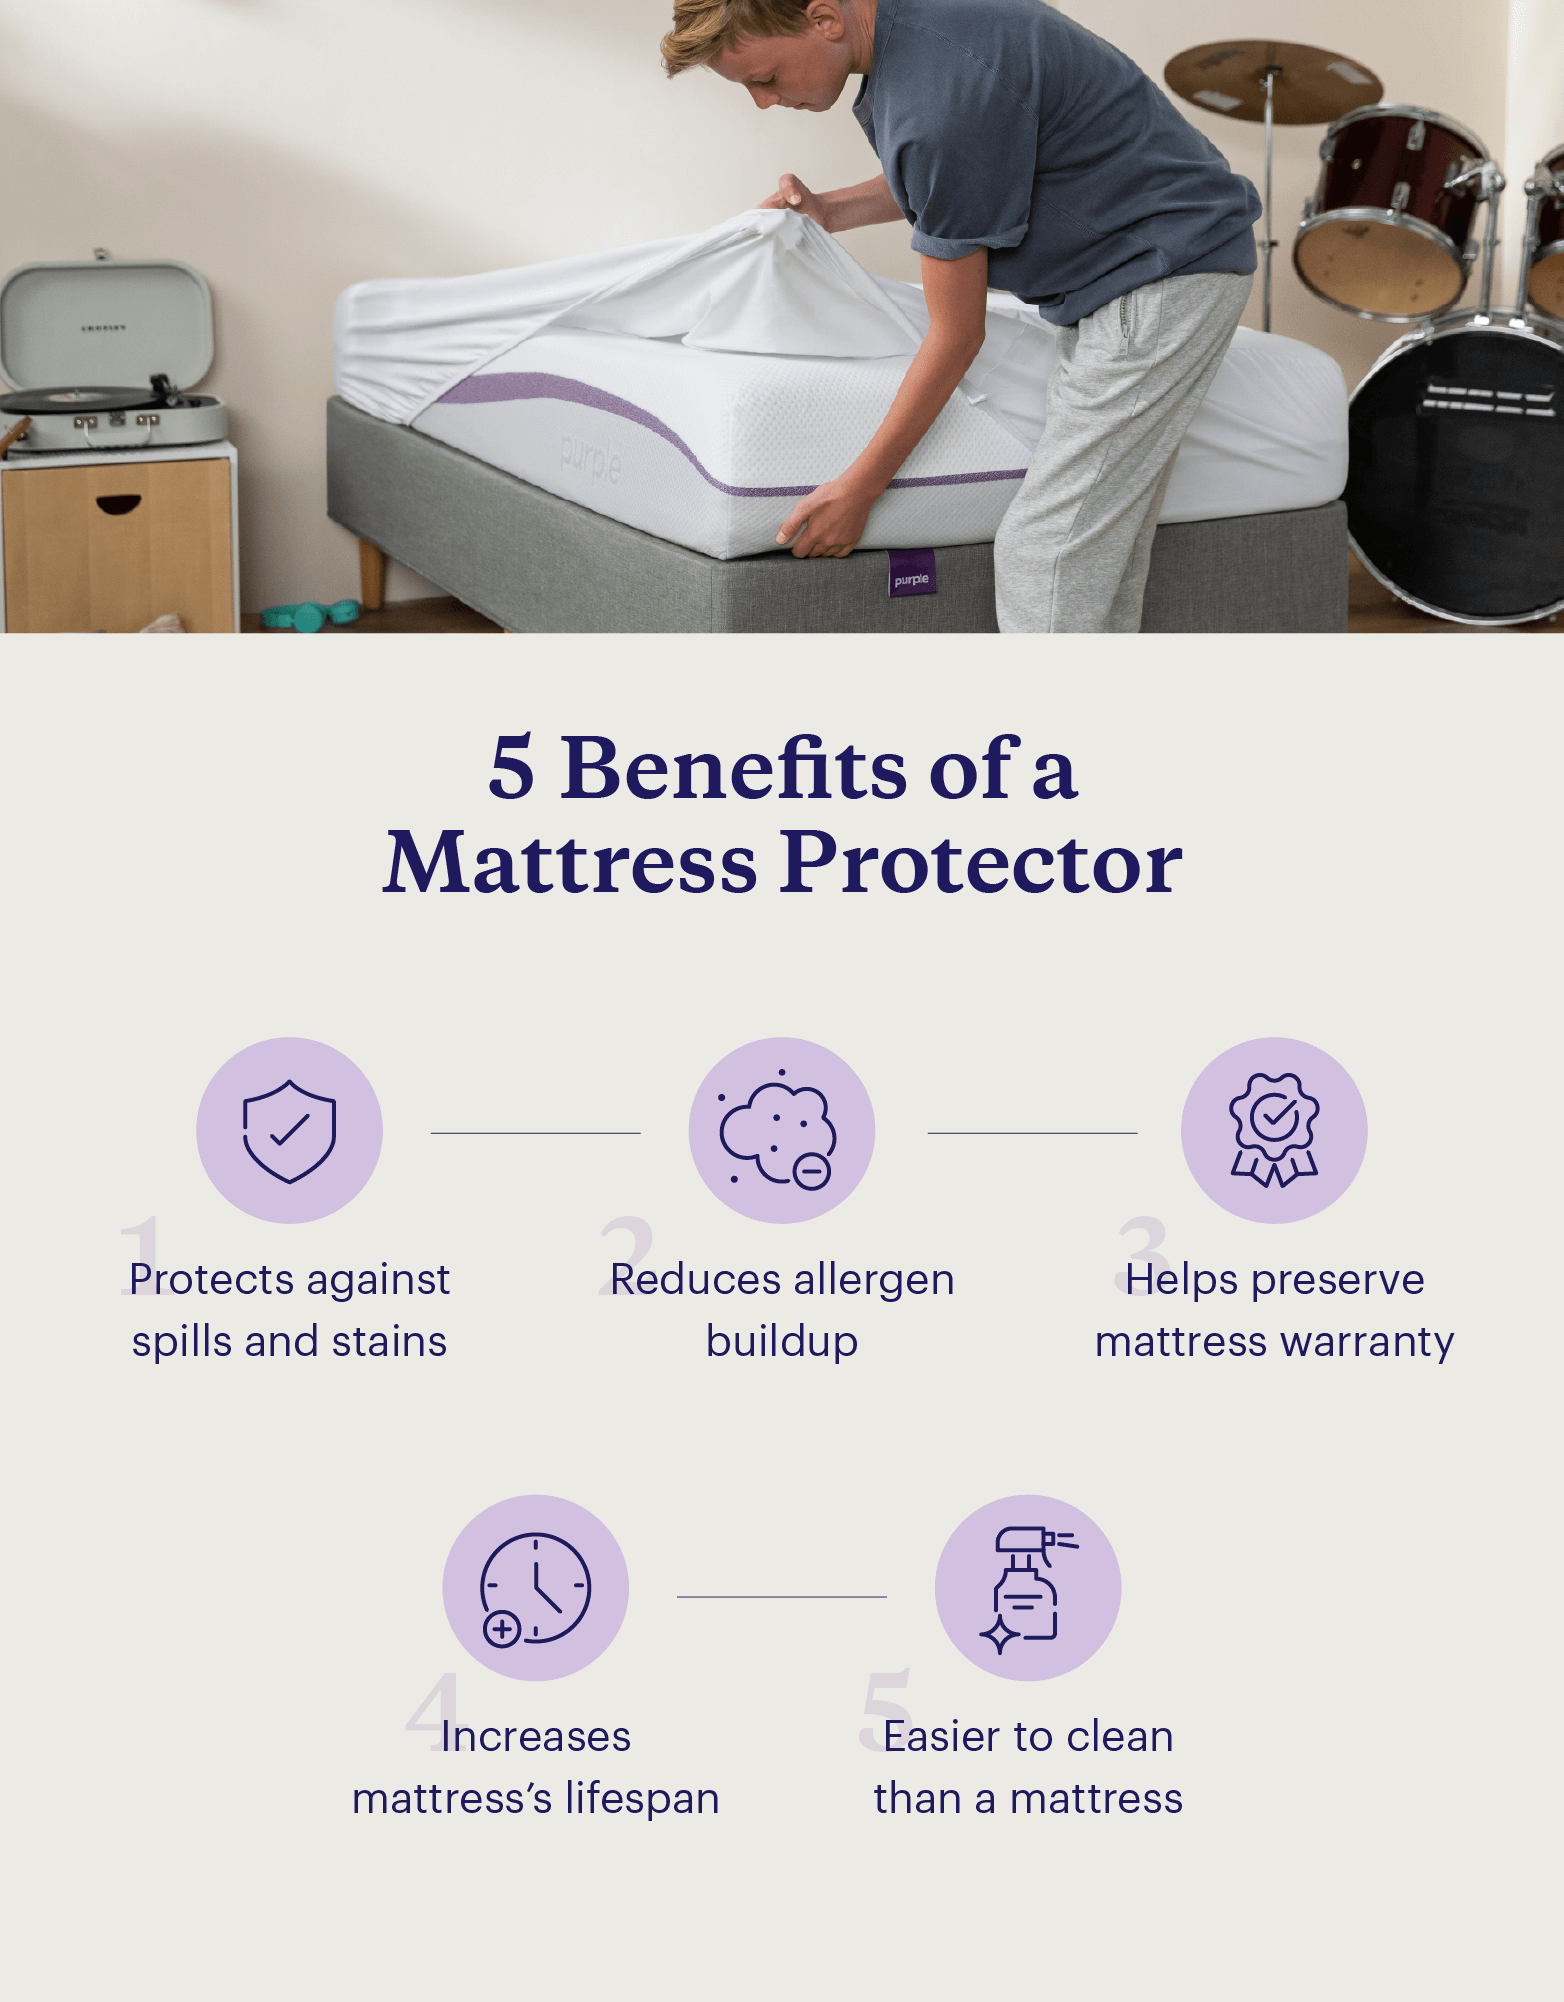 Graphic listing the benefits of using a mattress protector with an image of a young boy putting one on a bed.